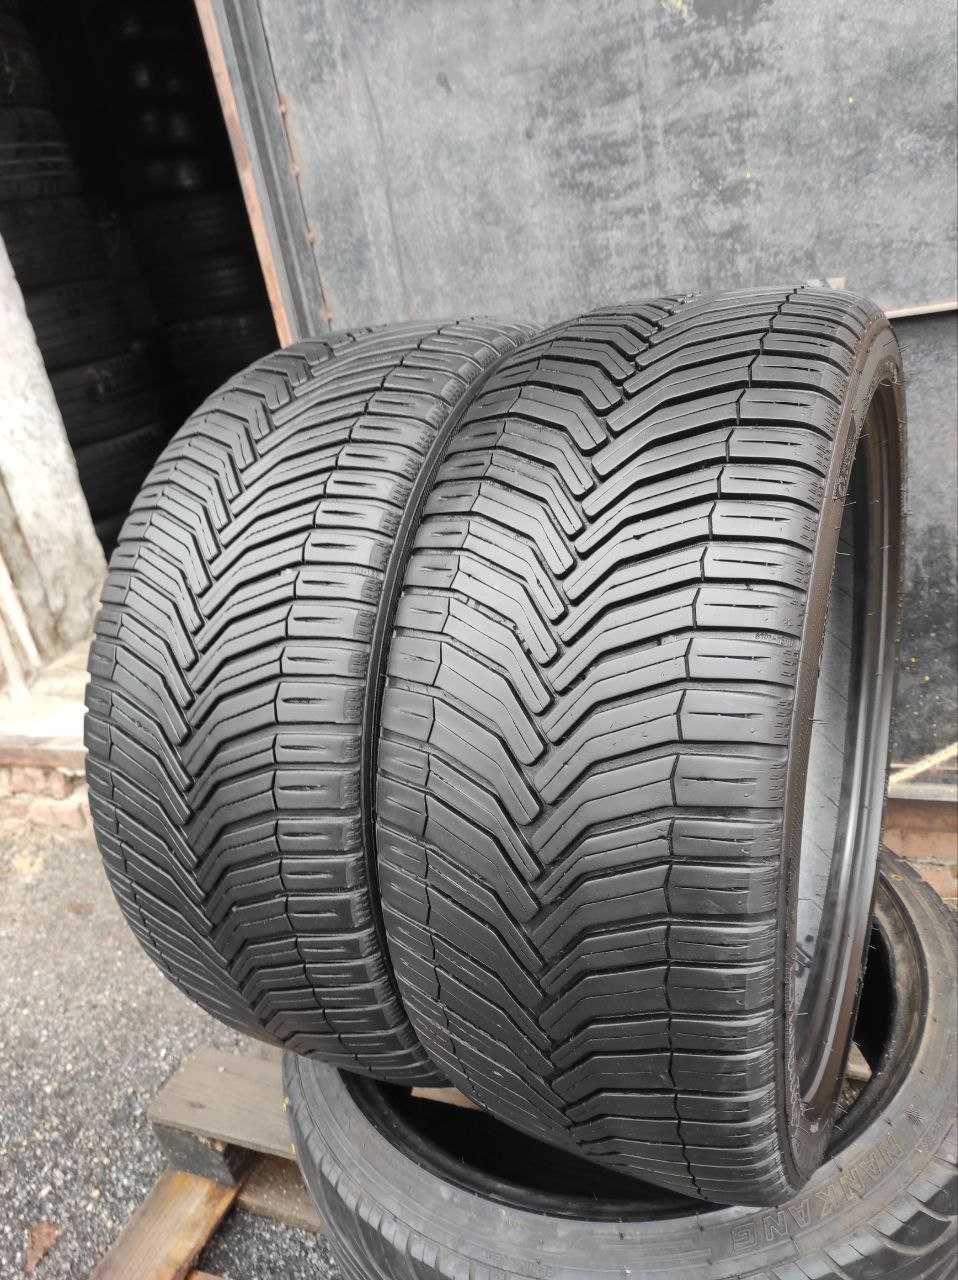 Michelin Cross Climate + 225/40r18 made in Germany 18год 5,2-5,7мм M+S